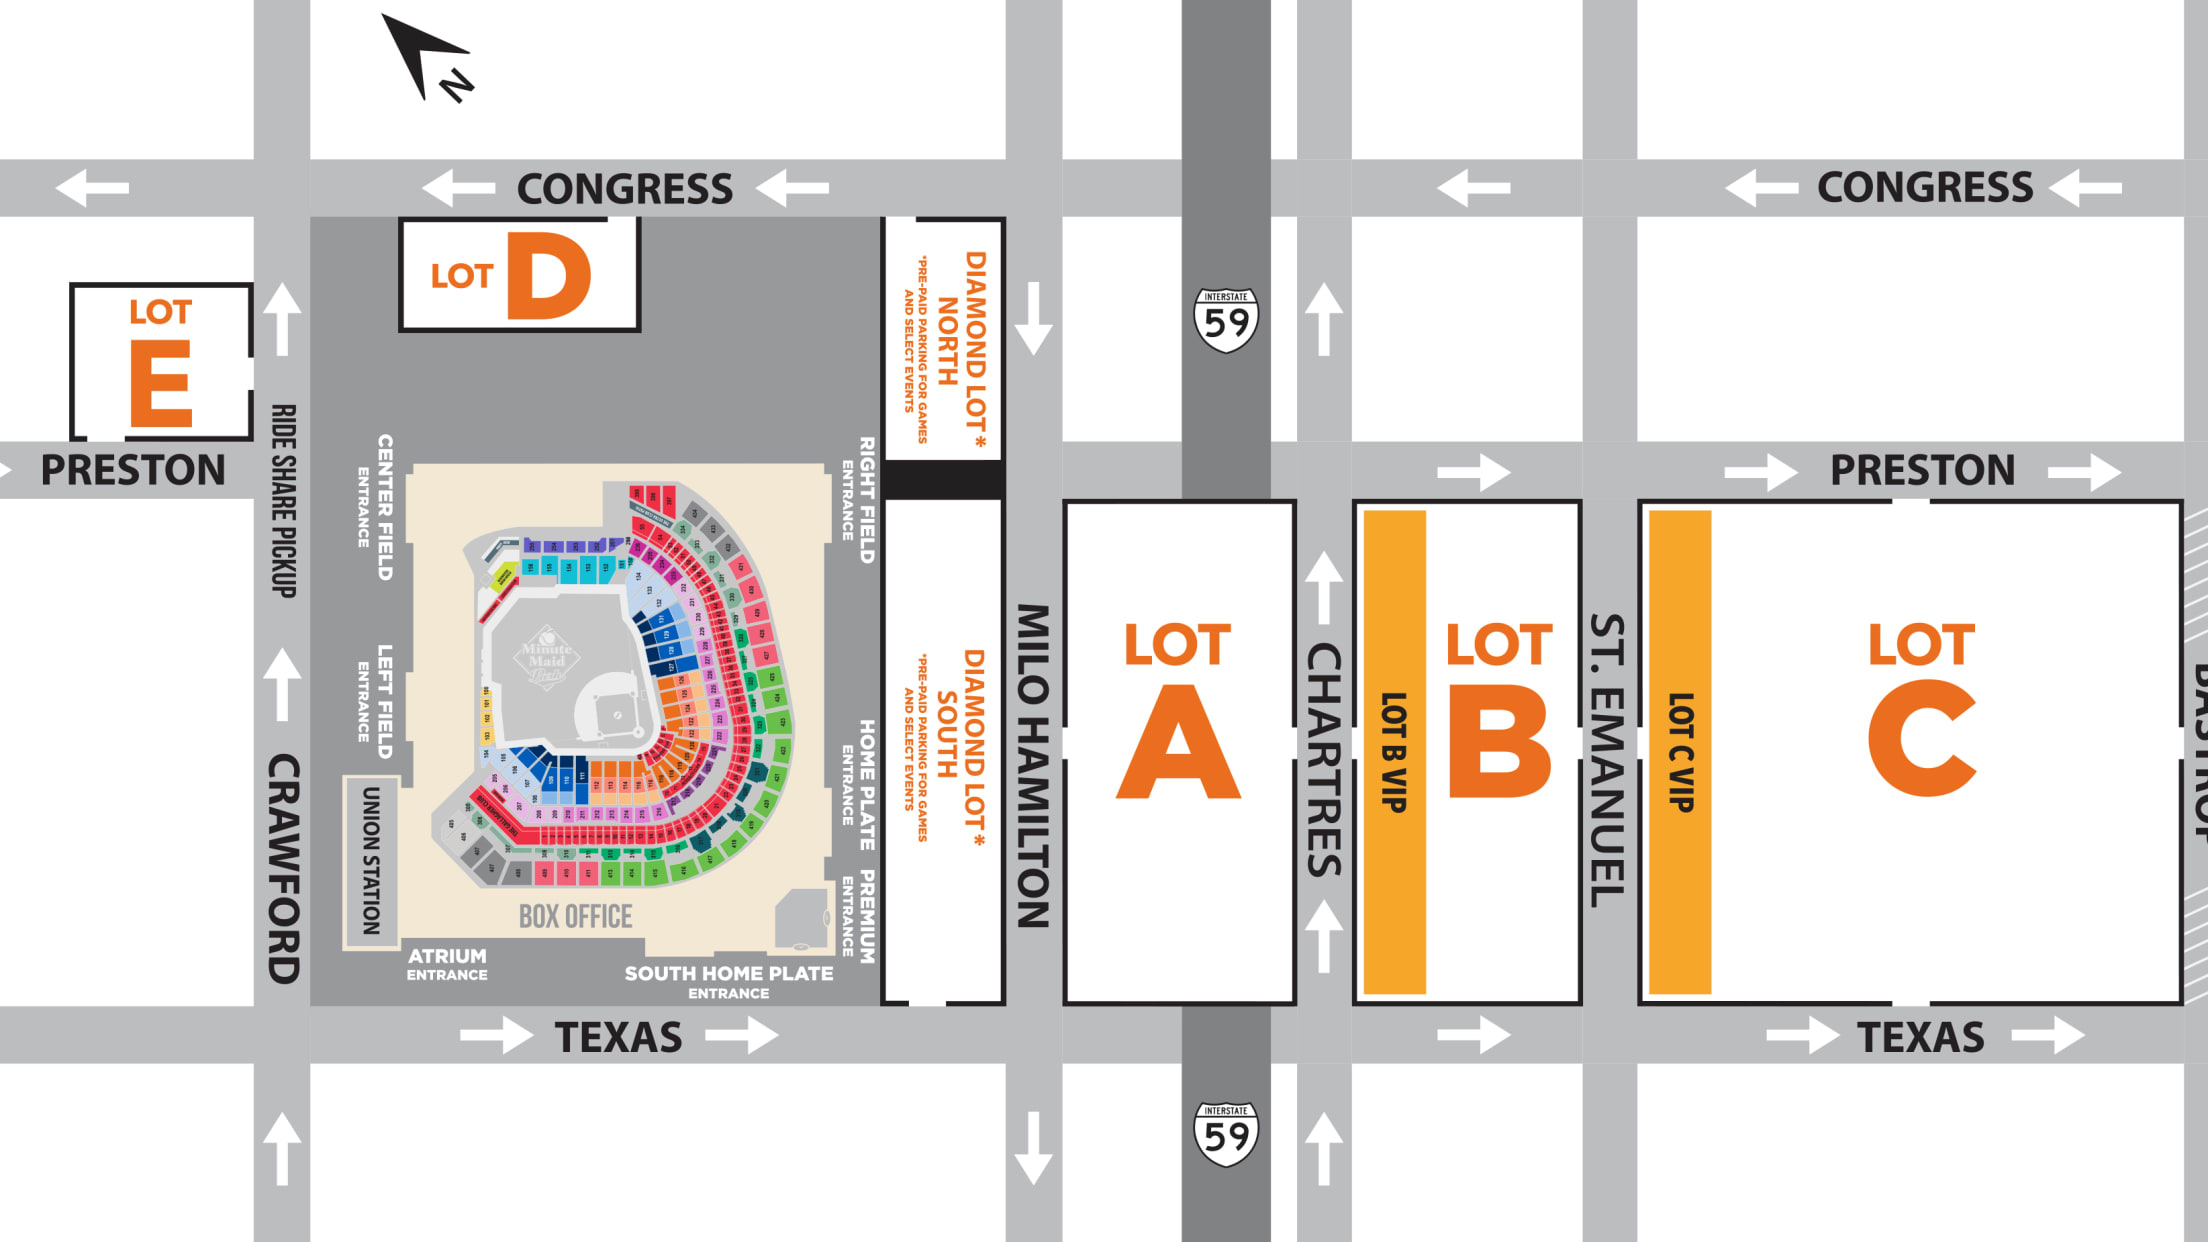 Minute Maid Park Seating Chart & Game Information